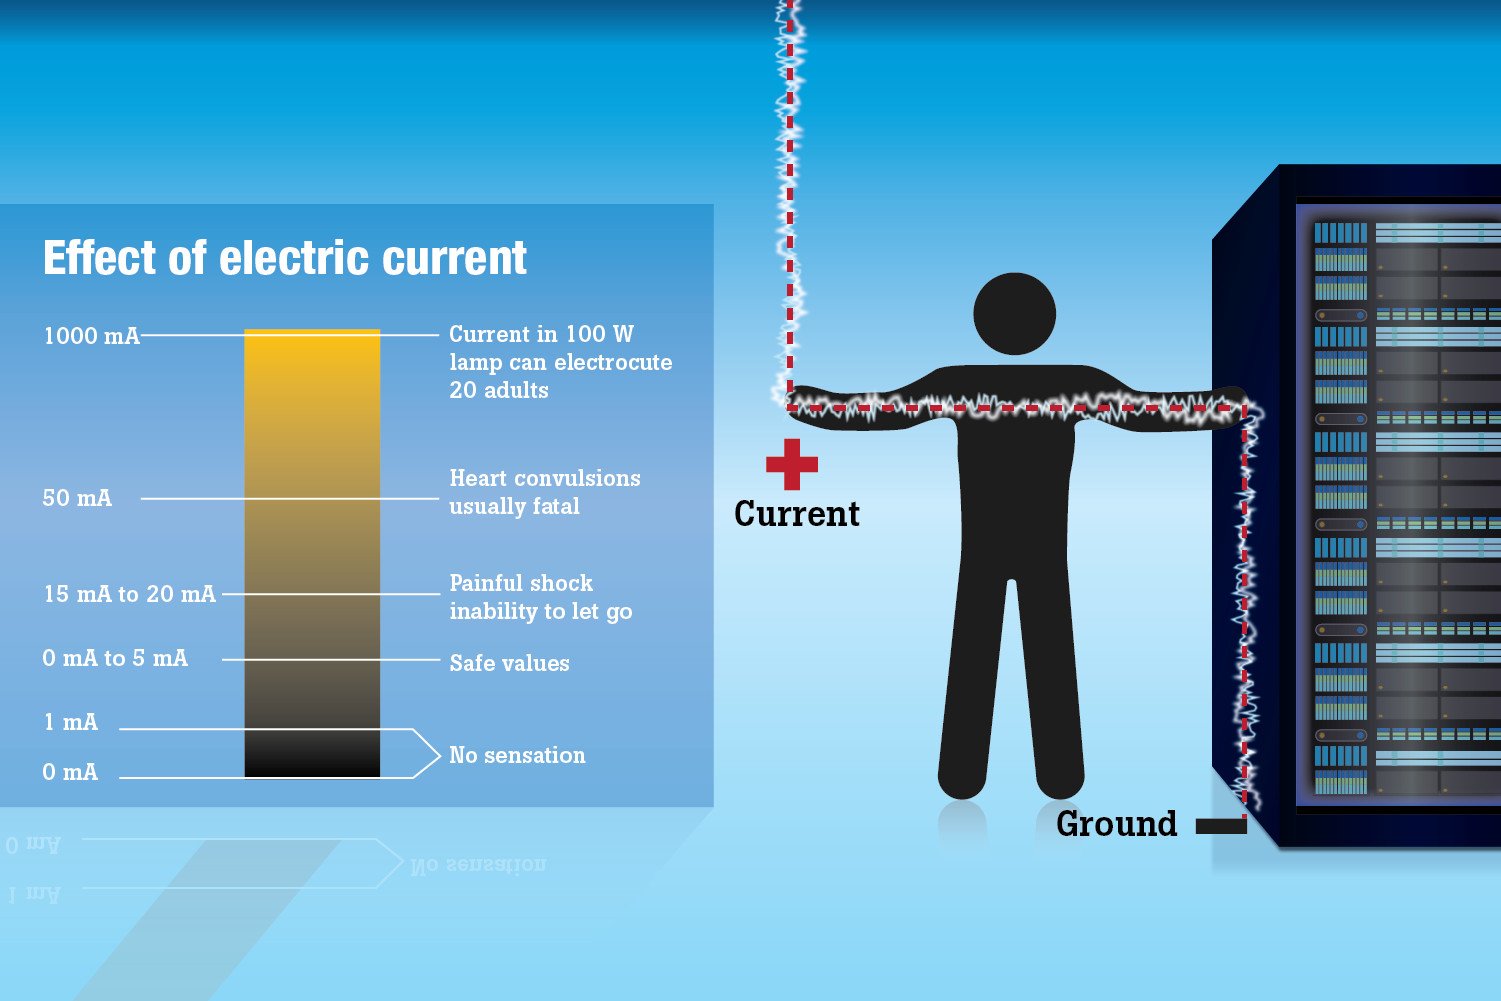 Effect of electrical current